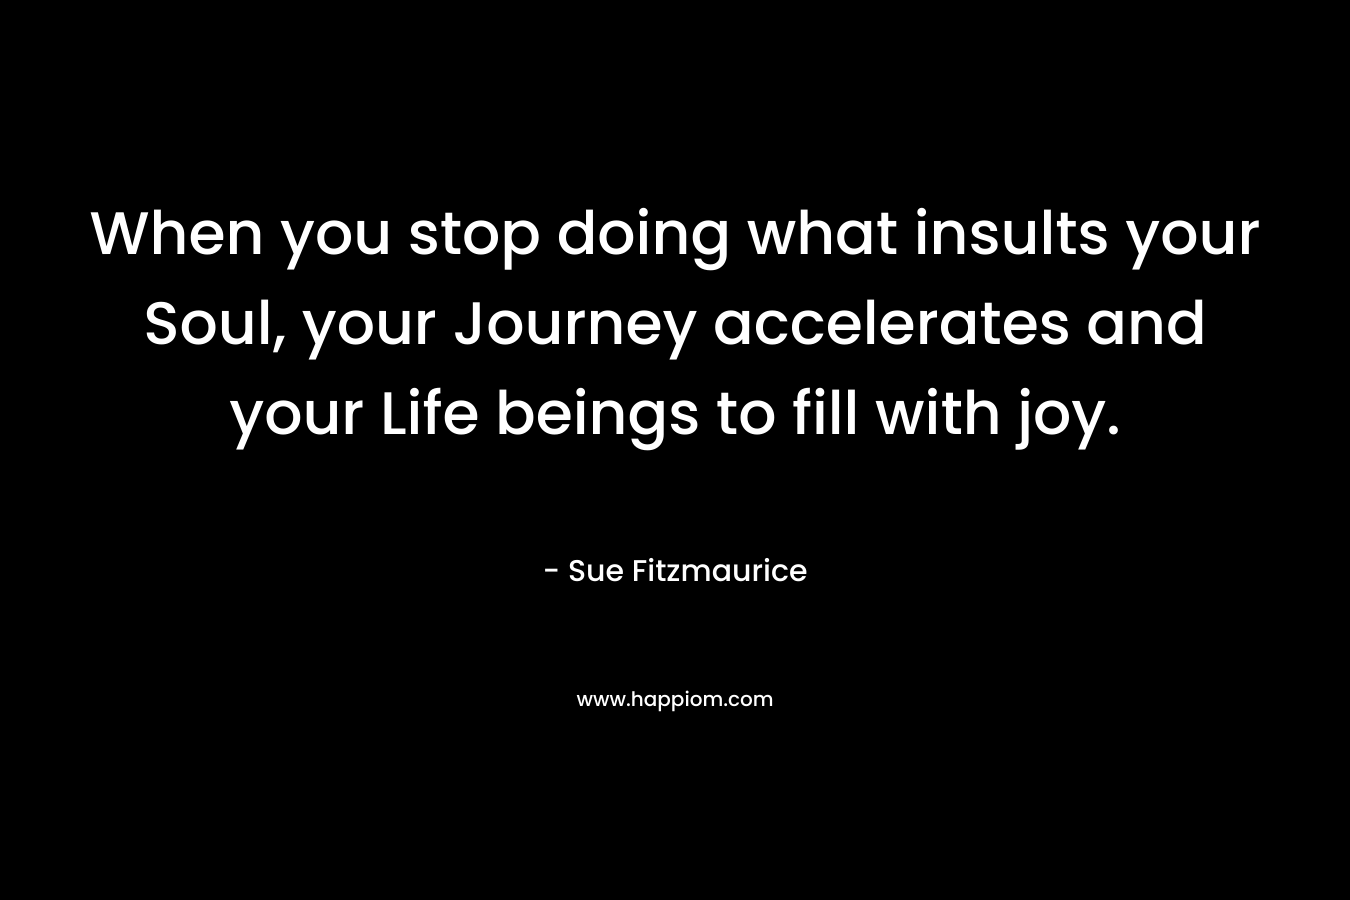 When you stop doing what insults your Soul, your Journey accelerates and your Life beings to fill with joy. – Sue Fitzmaurice